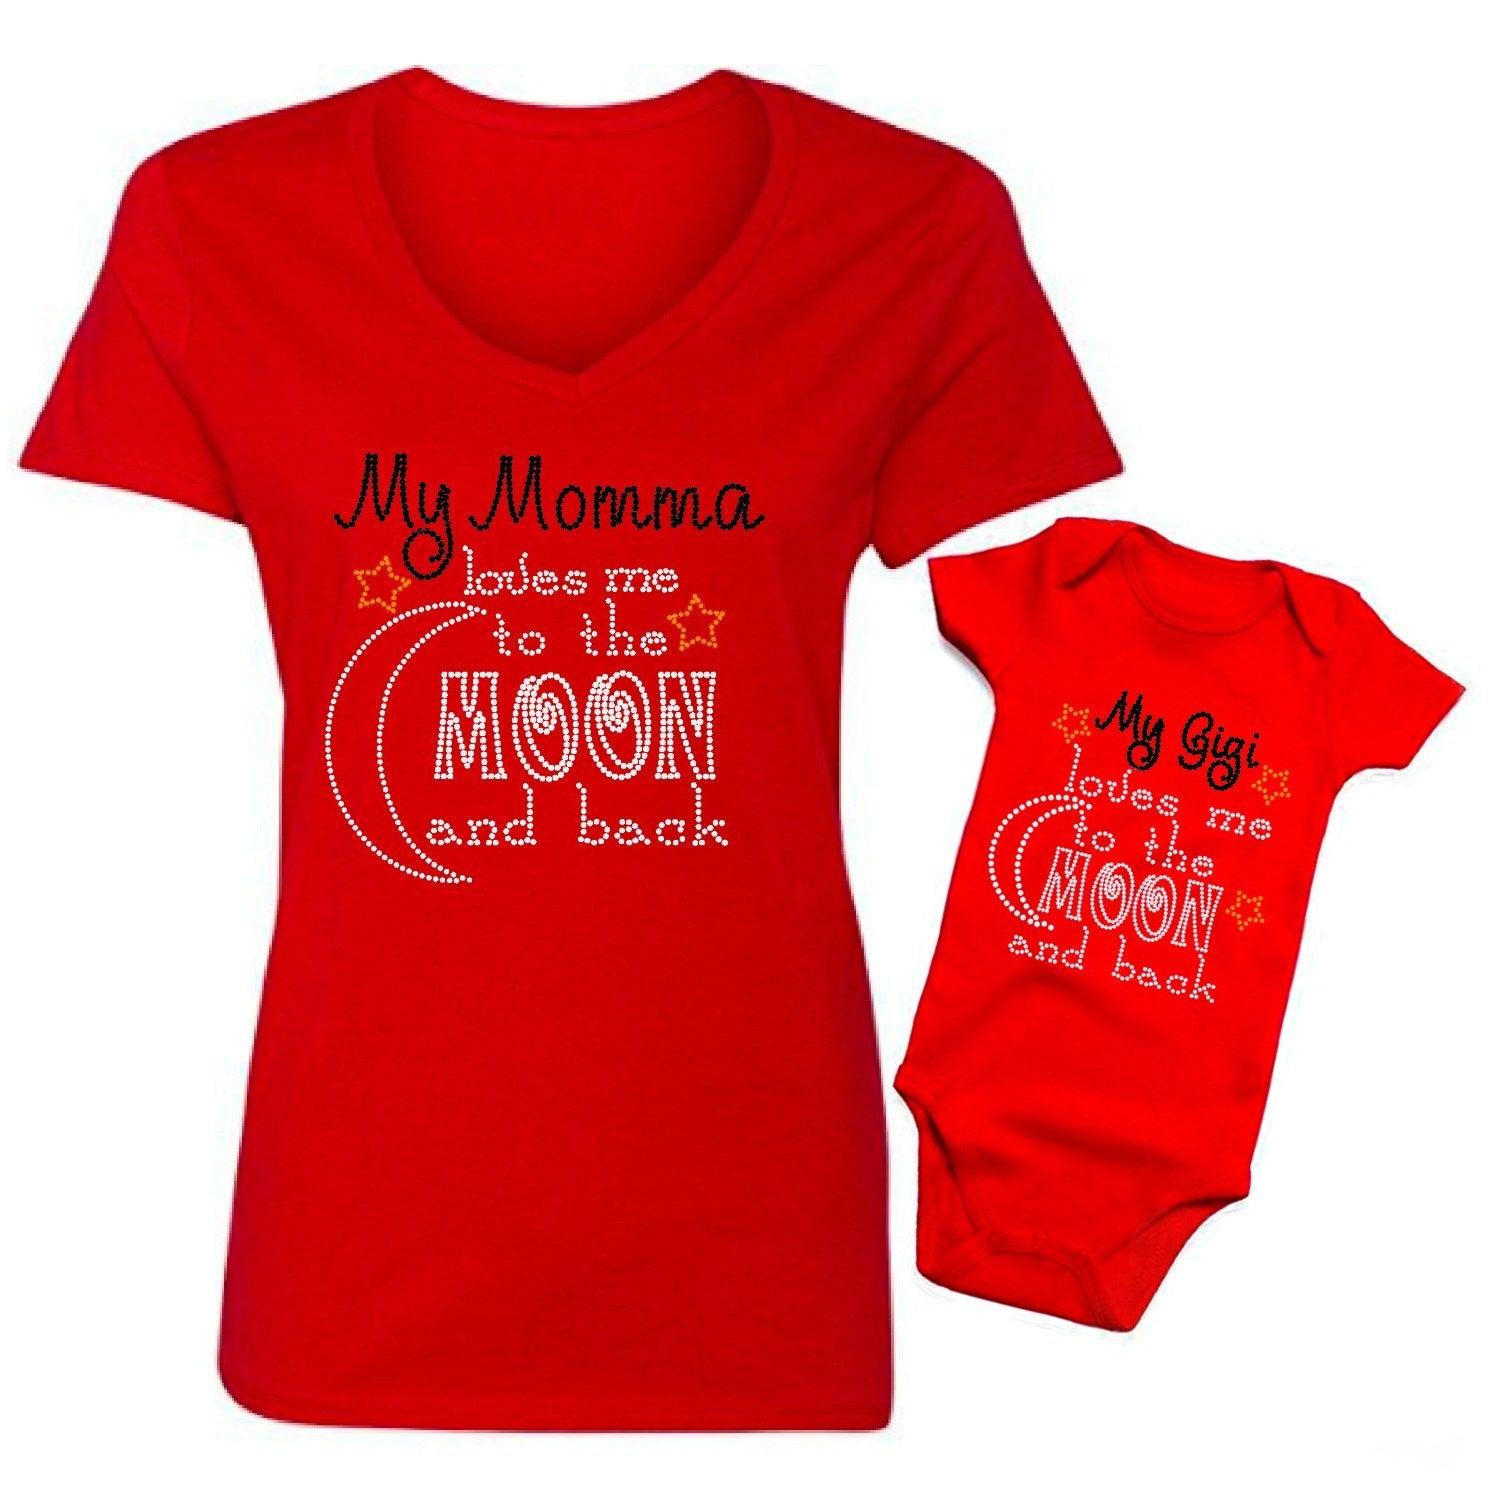 Loves Me to Moon and Back Mom and Baby T-Shirt Set